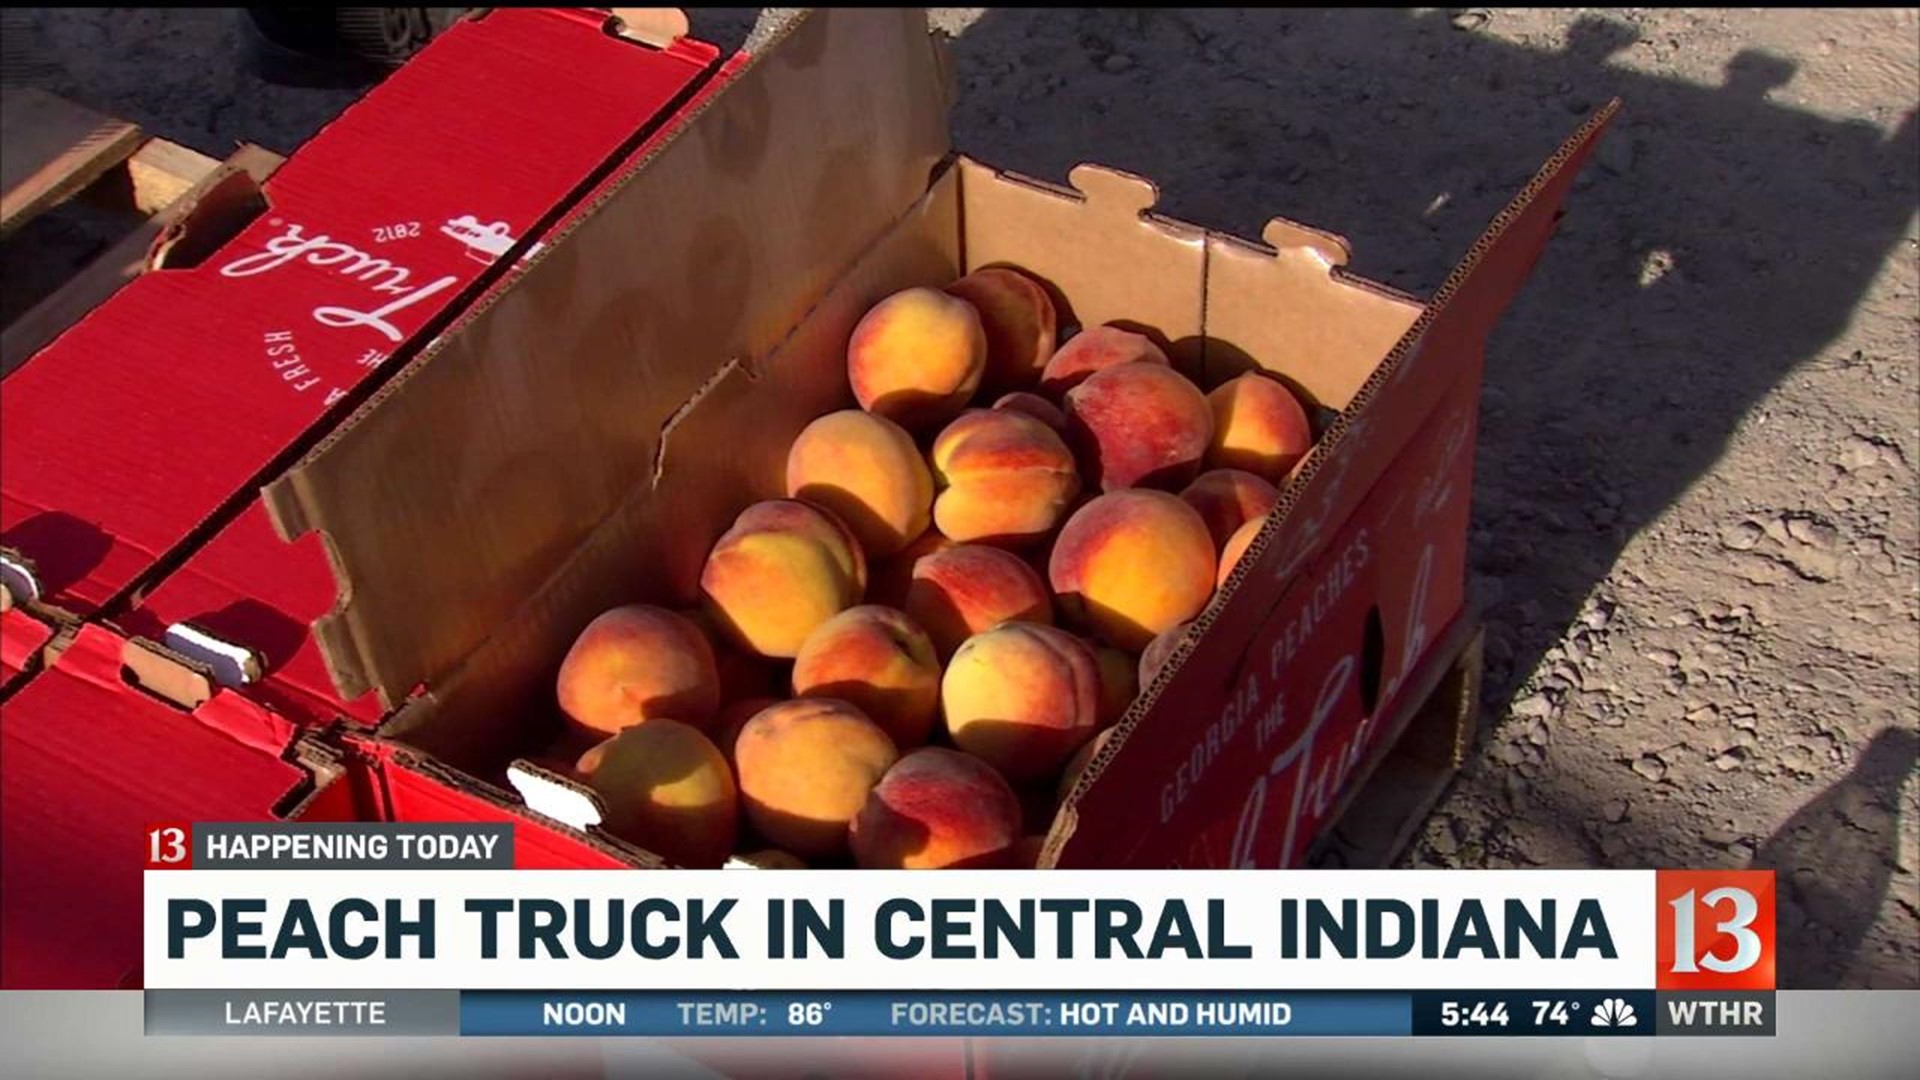 Peach Truck returning to Indiana with one of its best crops yet